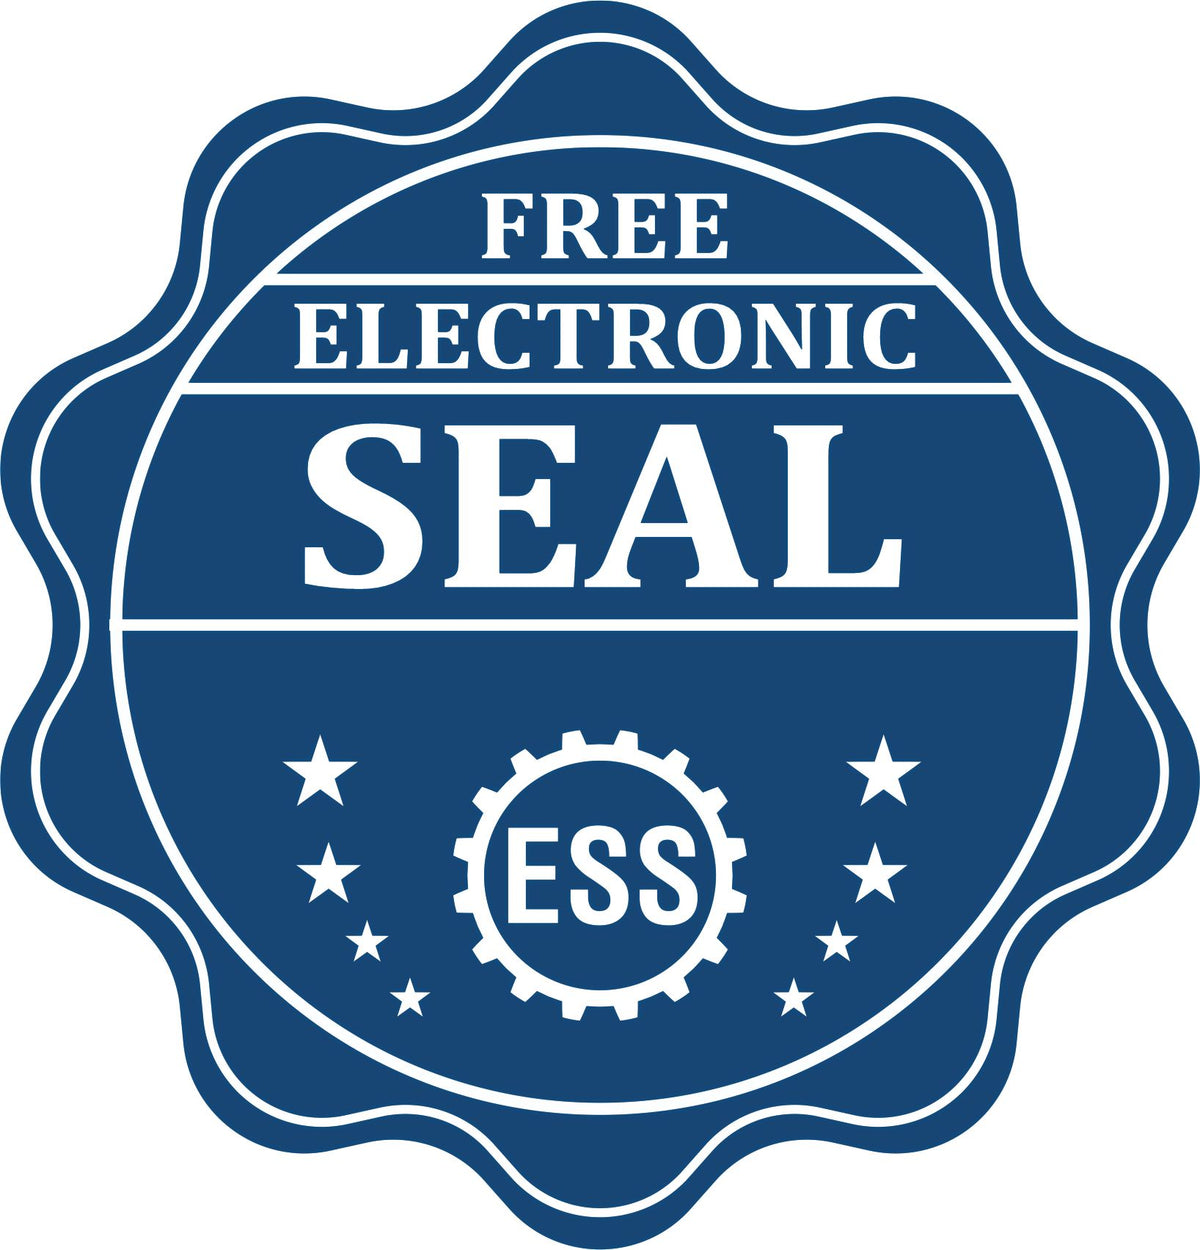 A badge showing a free electronic seal for the Super Slim Maine Notary Public Stamp with stars and the ESS gear on the emblem.